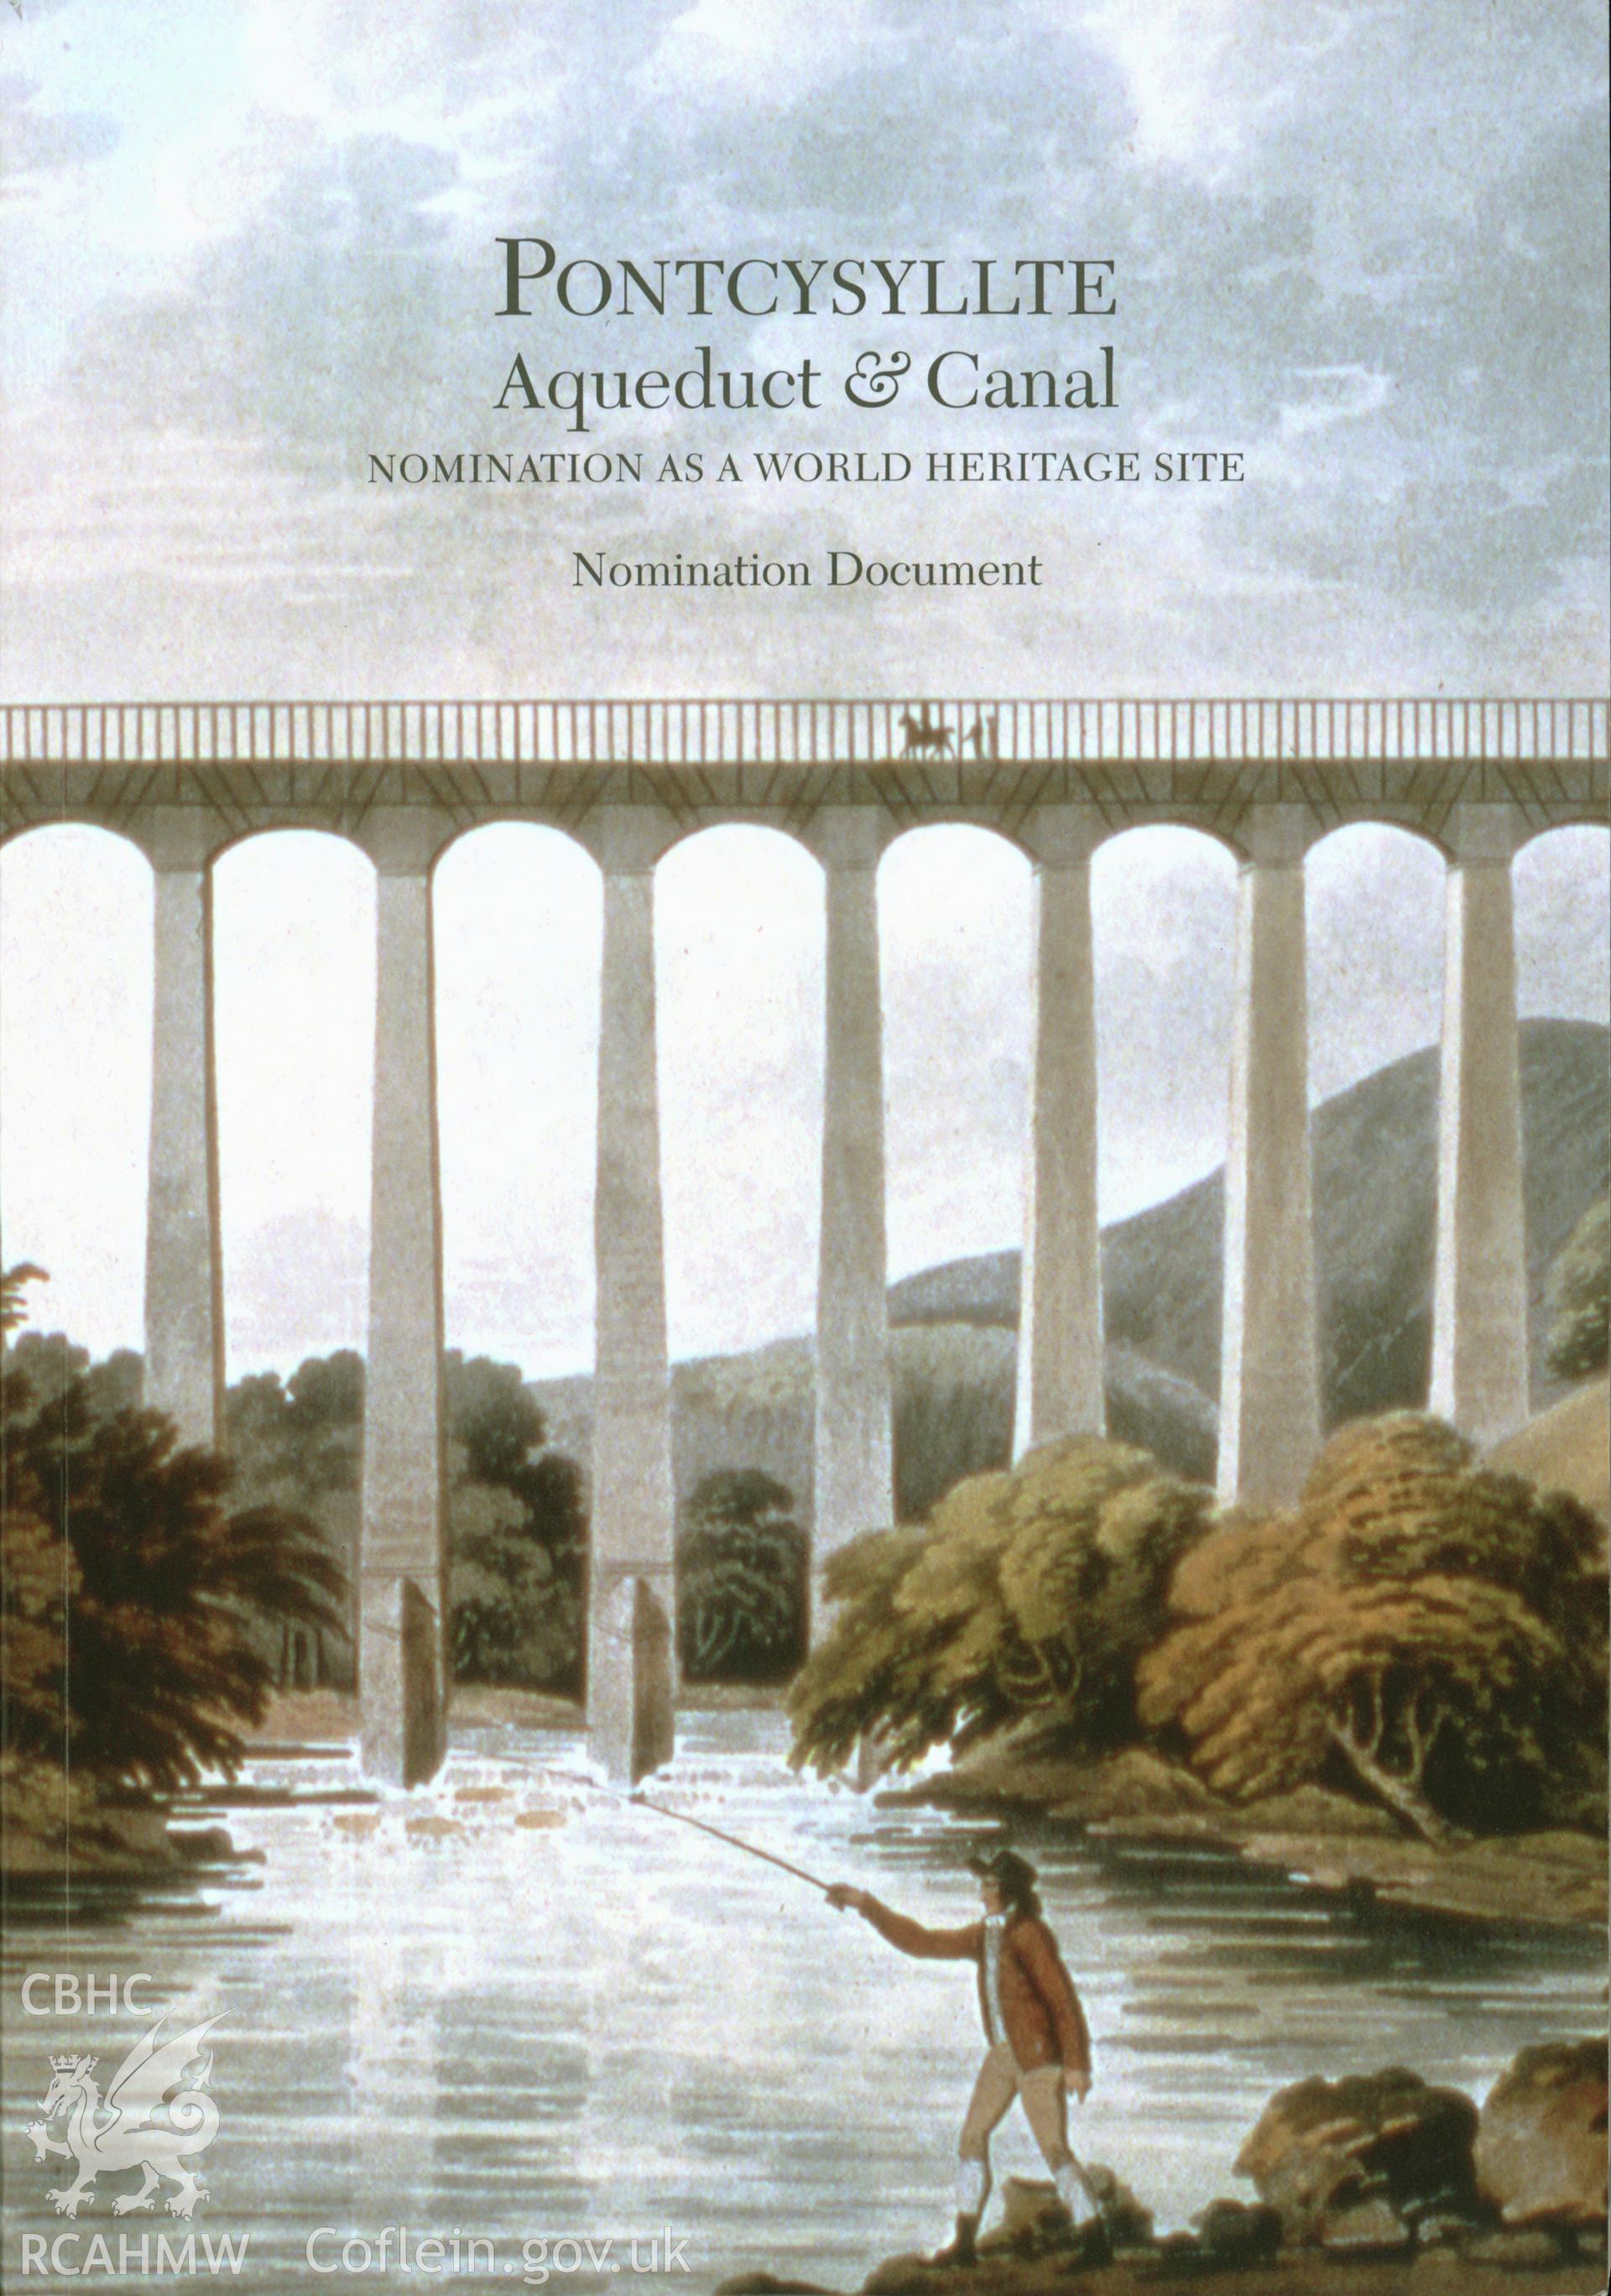 Digitized copy of the front book cover from Pontcysyllte Aqueduct and Canal, Nomination as a World Heritage Site,  Nomination Document